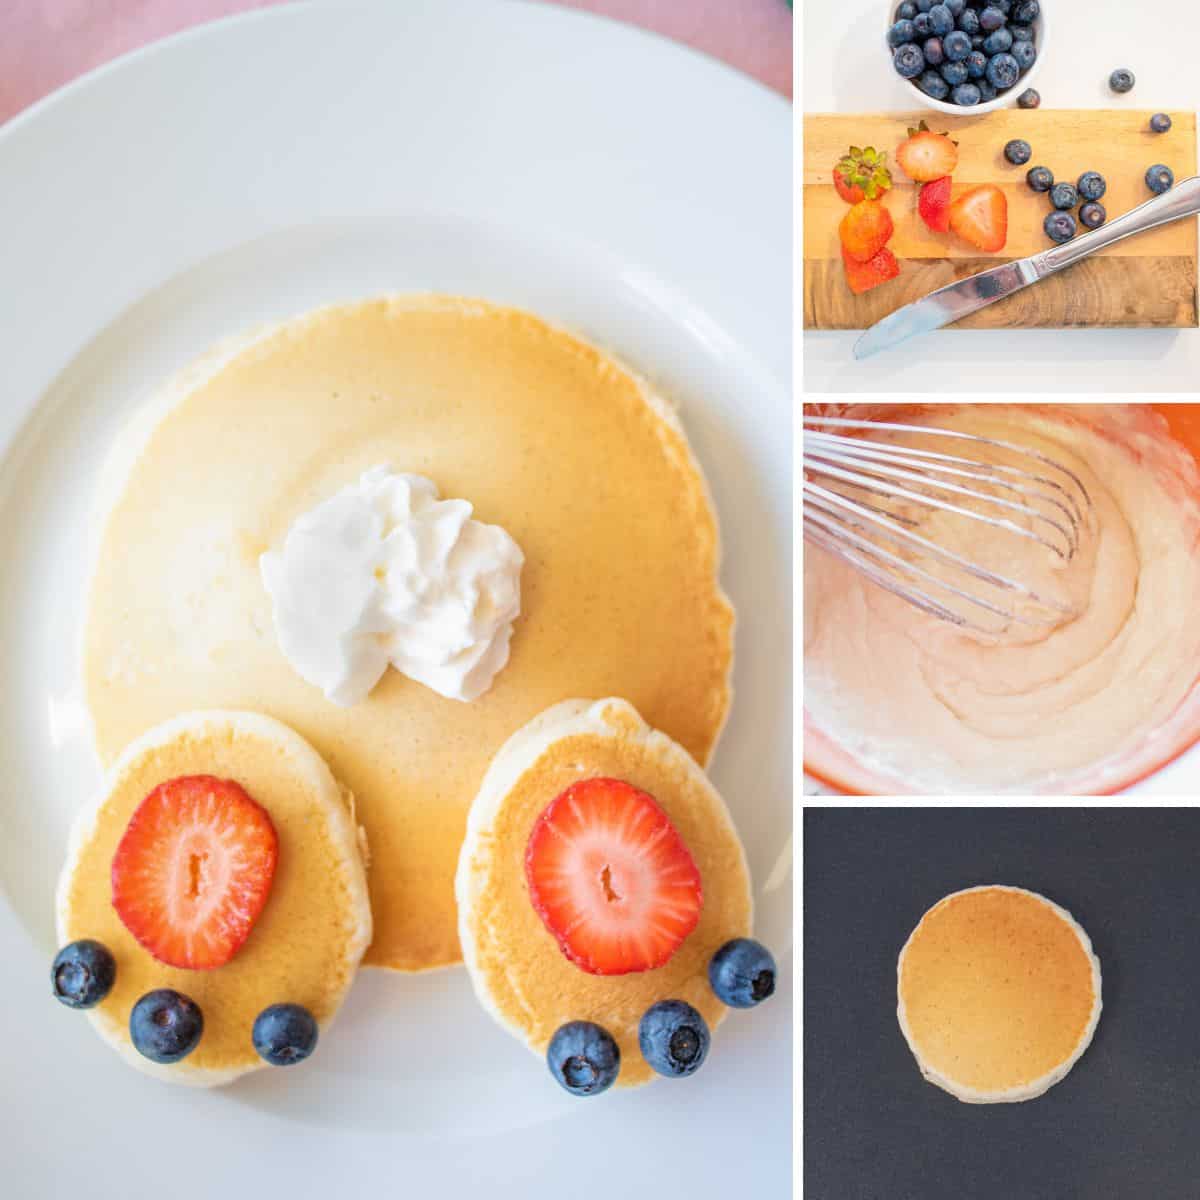 Collage of photos of steps to make bunny pancakes: slicing strawberries, mixing batter, and cooking round pancake on griddle.